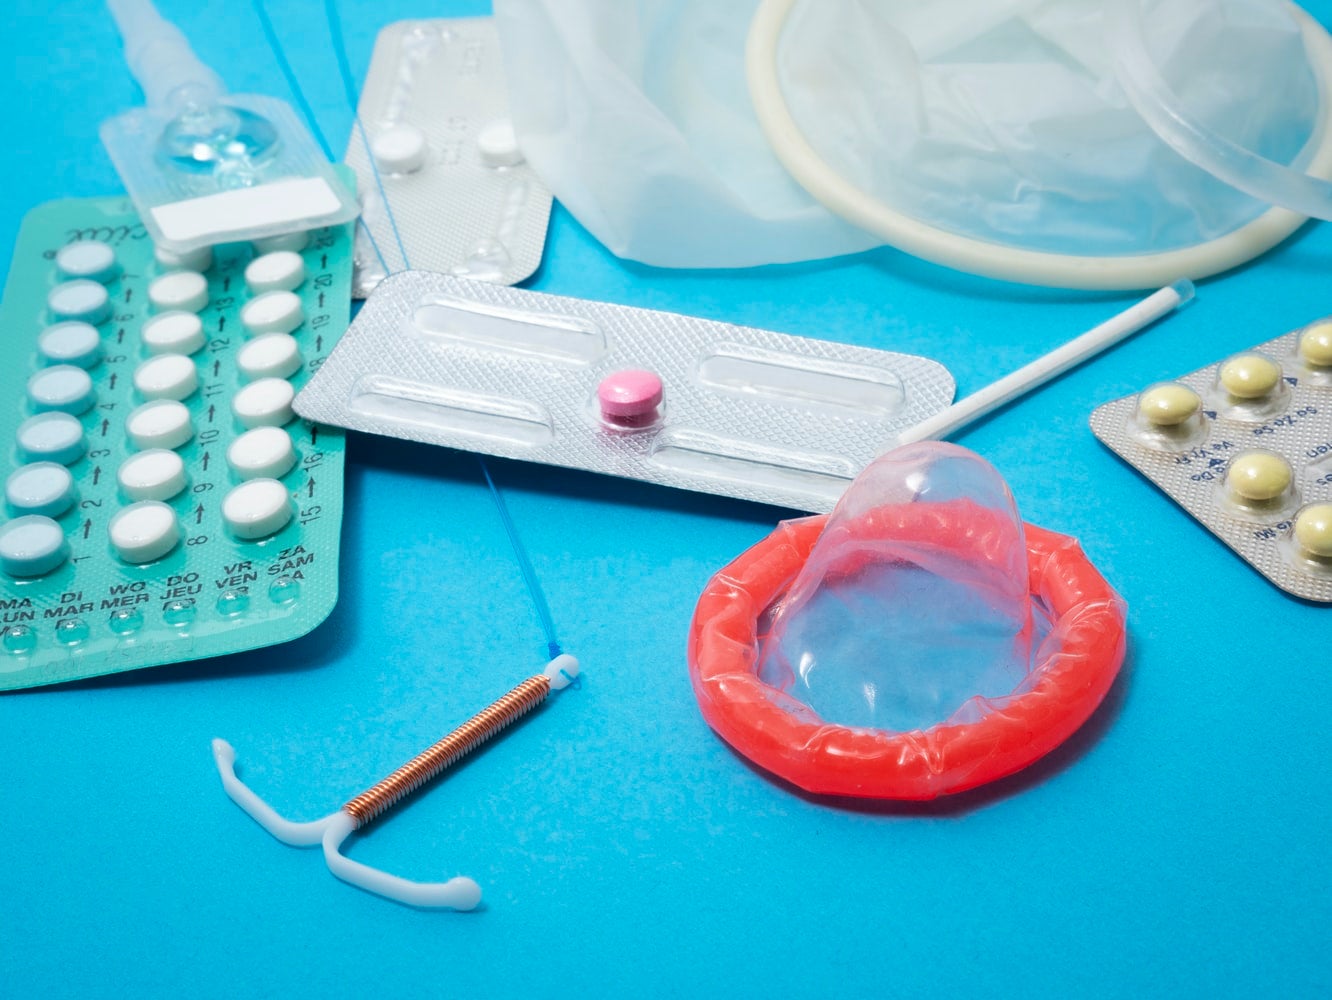 Reproductive health supplies set out on surface.